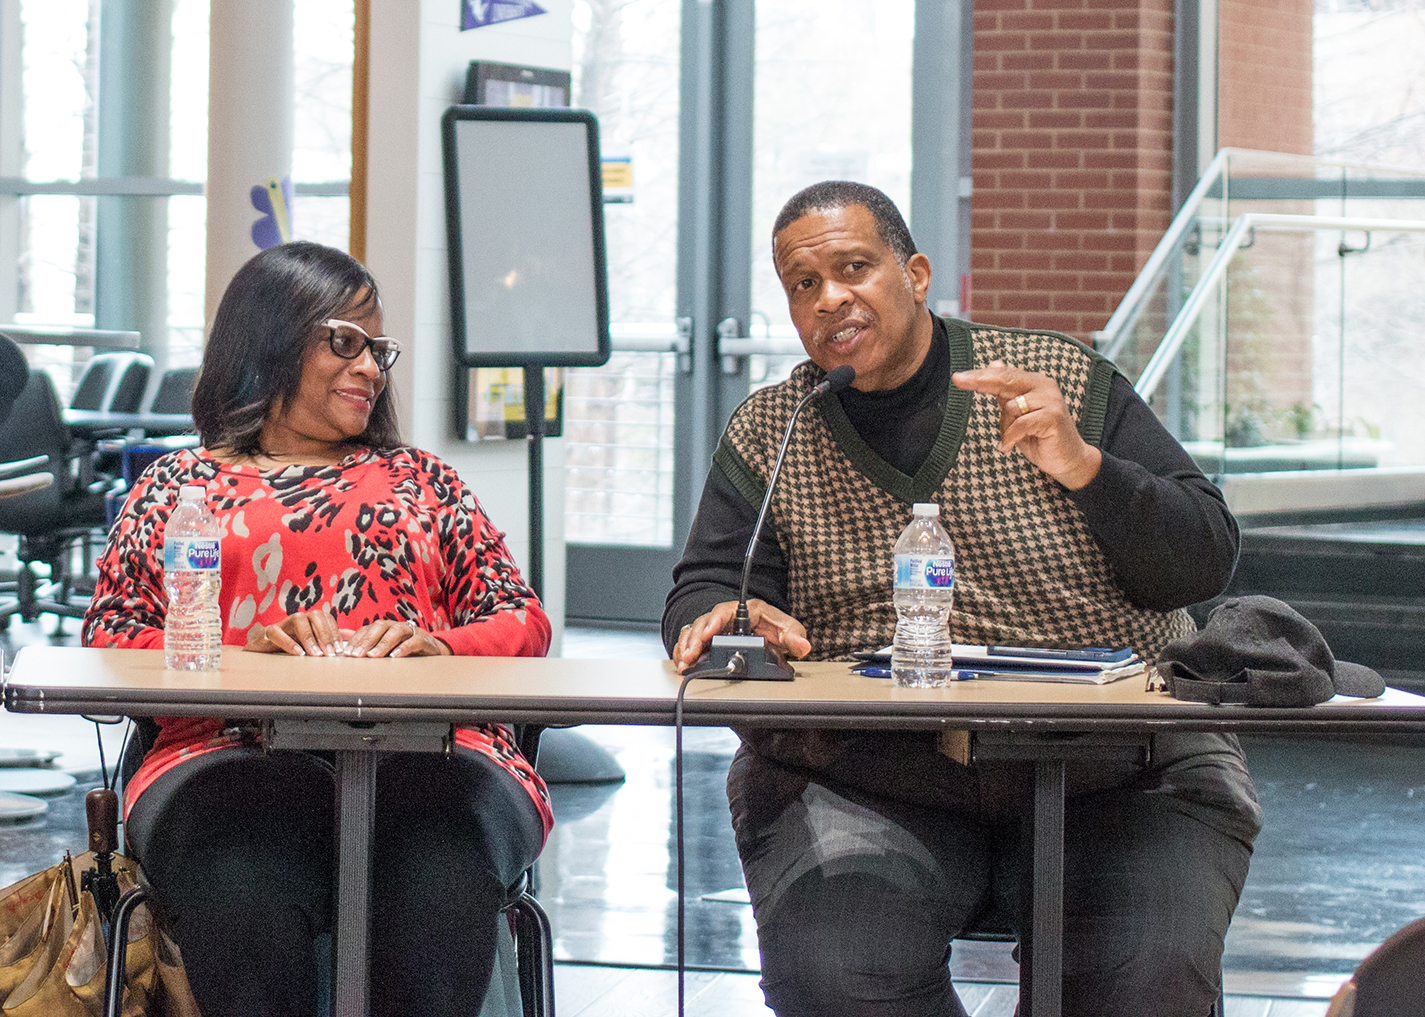 Local dentist Marie Holliday and R.D. Construction CEO and president Randle Howard discuss owning a business Feb. 28 at the Black Business Panel on TR.